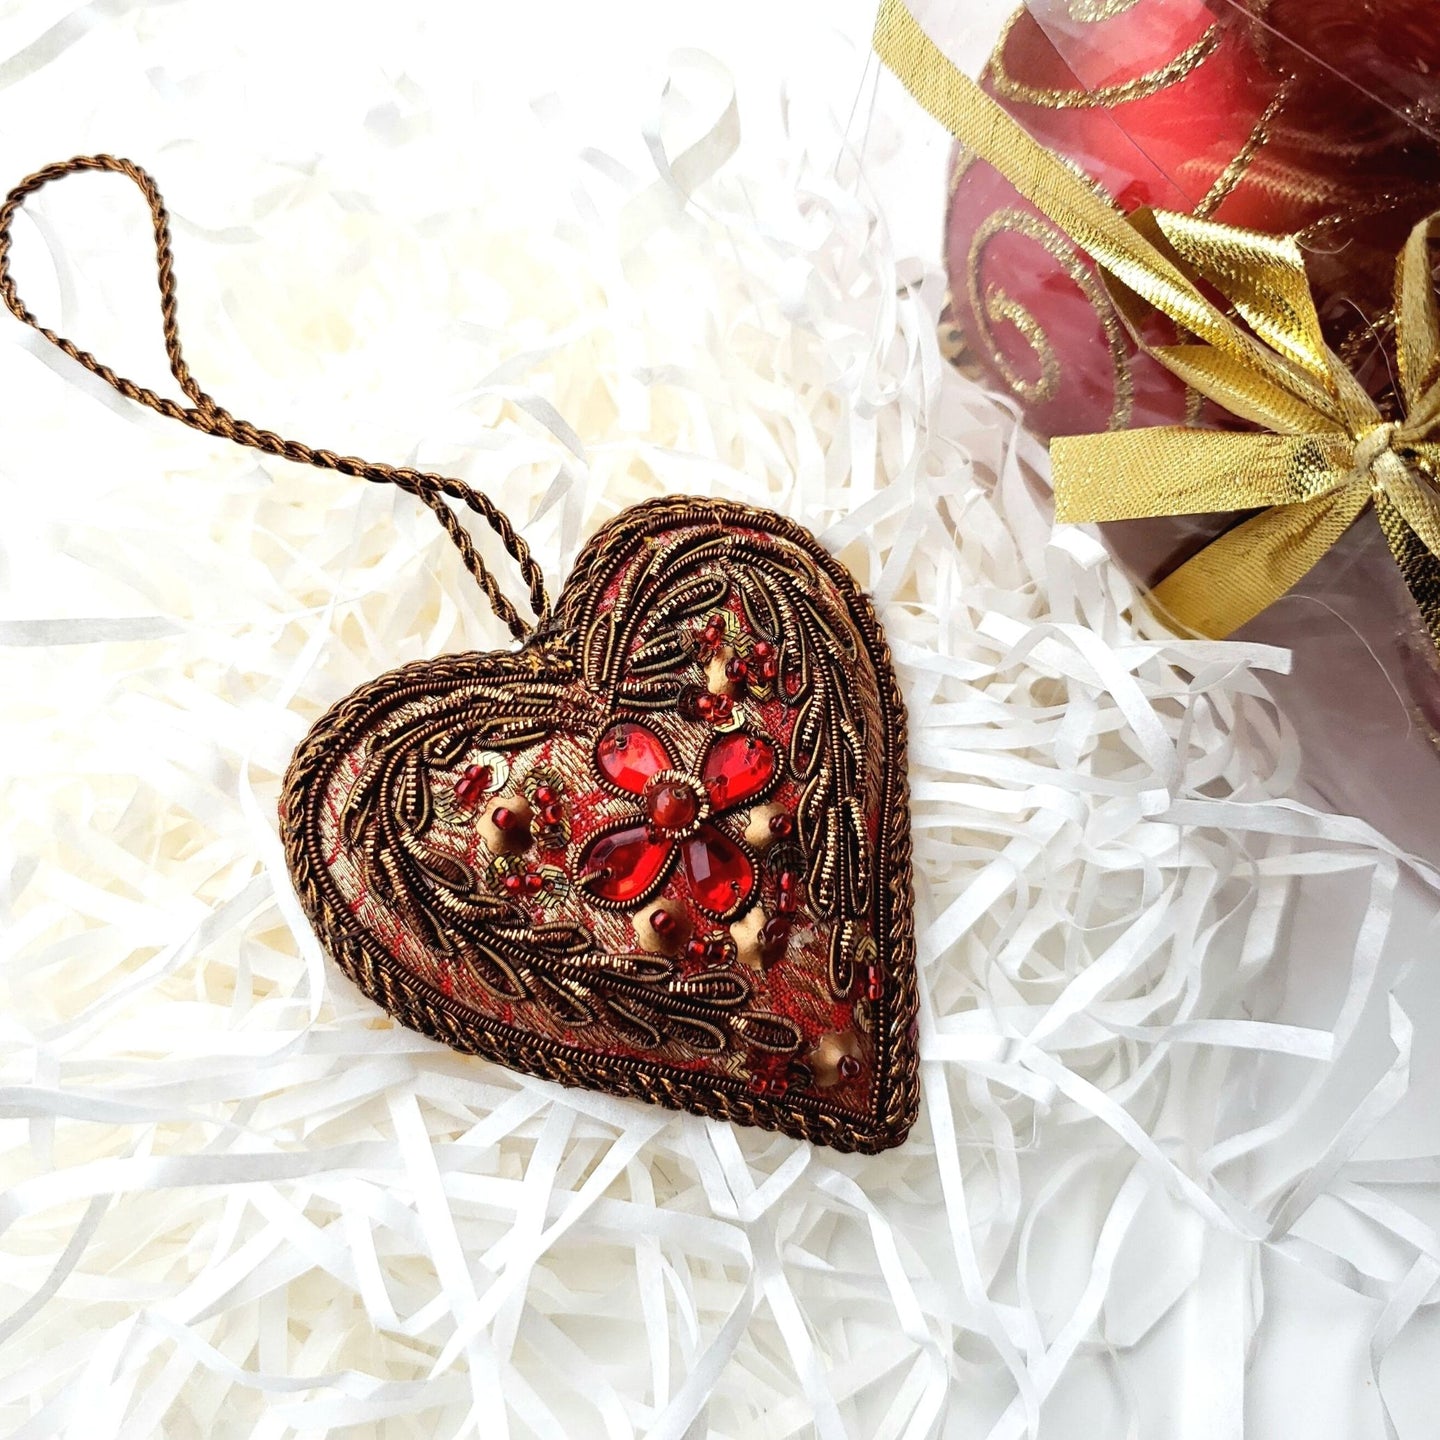 Hand embroidered red heart hanging ornament.